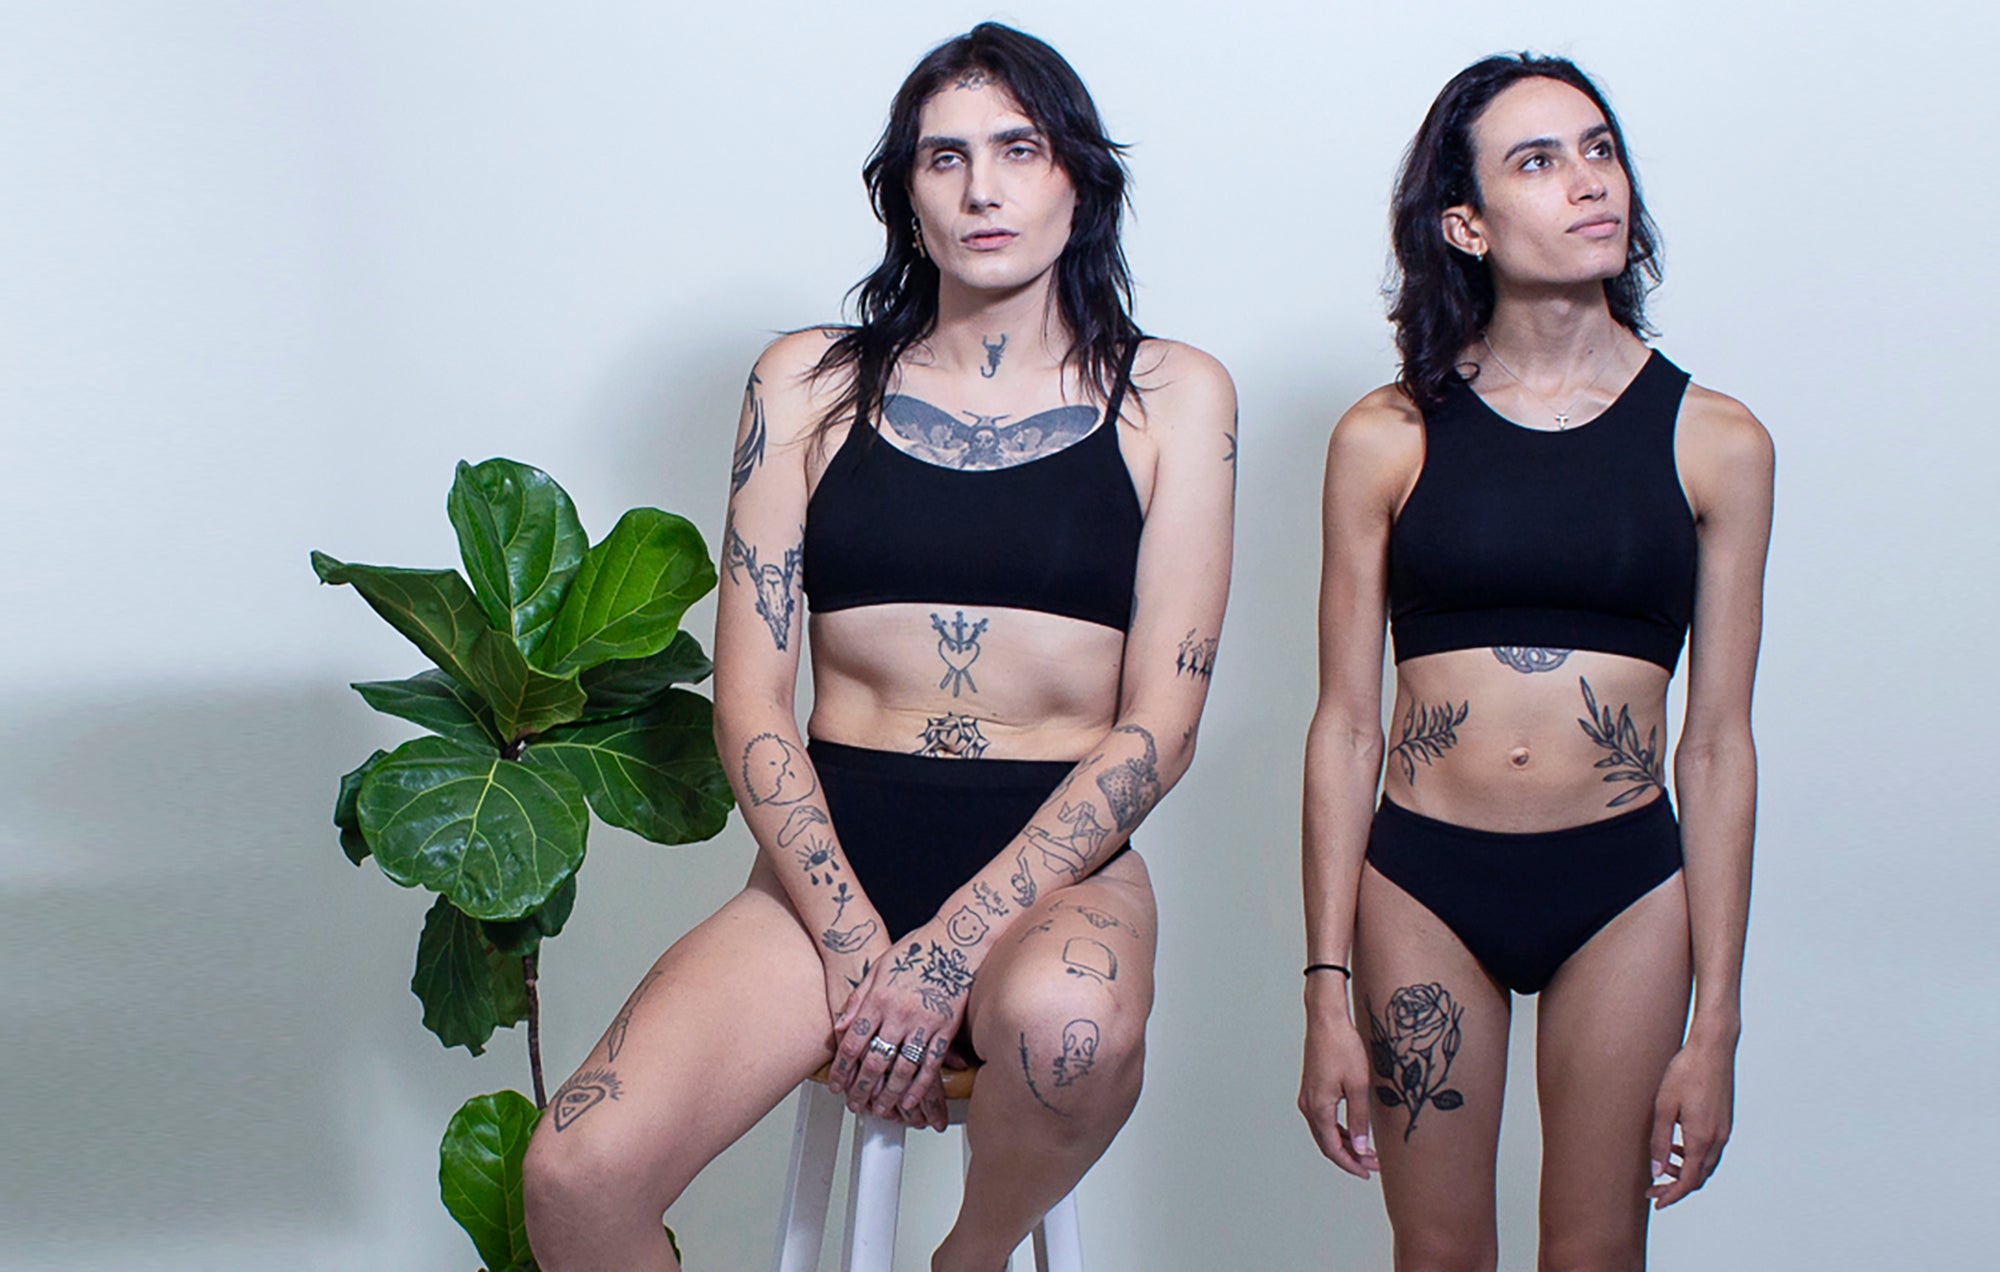 Two lingerie models wear gender-affirming custom lingerie. The plus size model wears a Plus size bra and panty sets and the other model wears a sustainable bamboo lingerie set. 